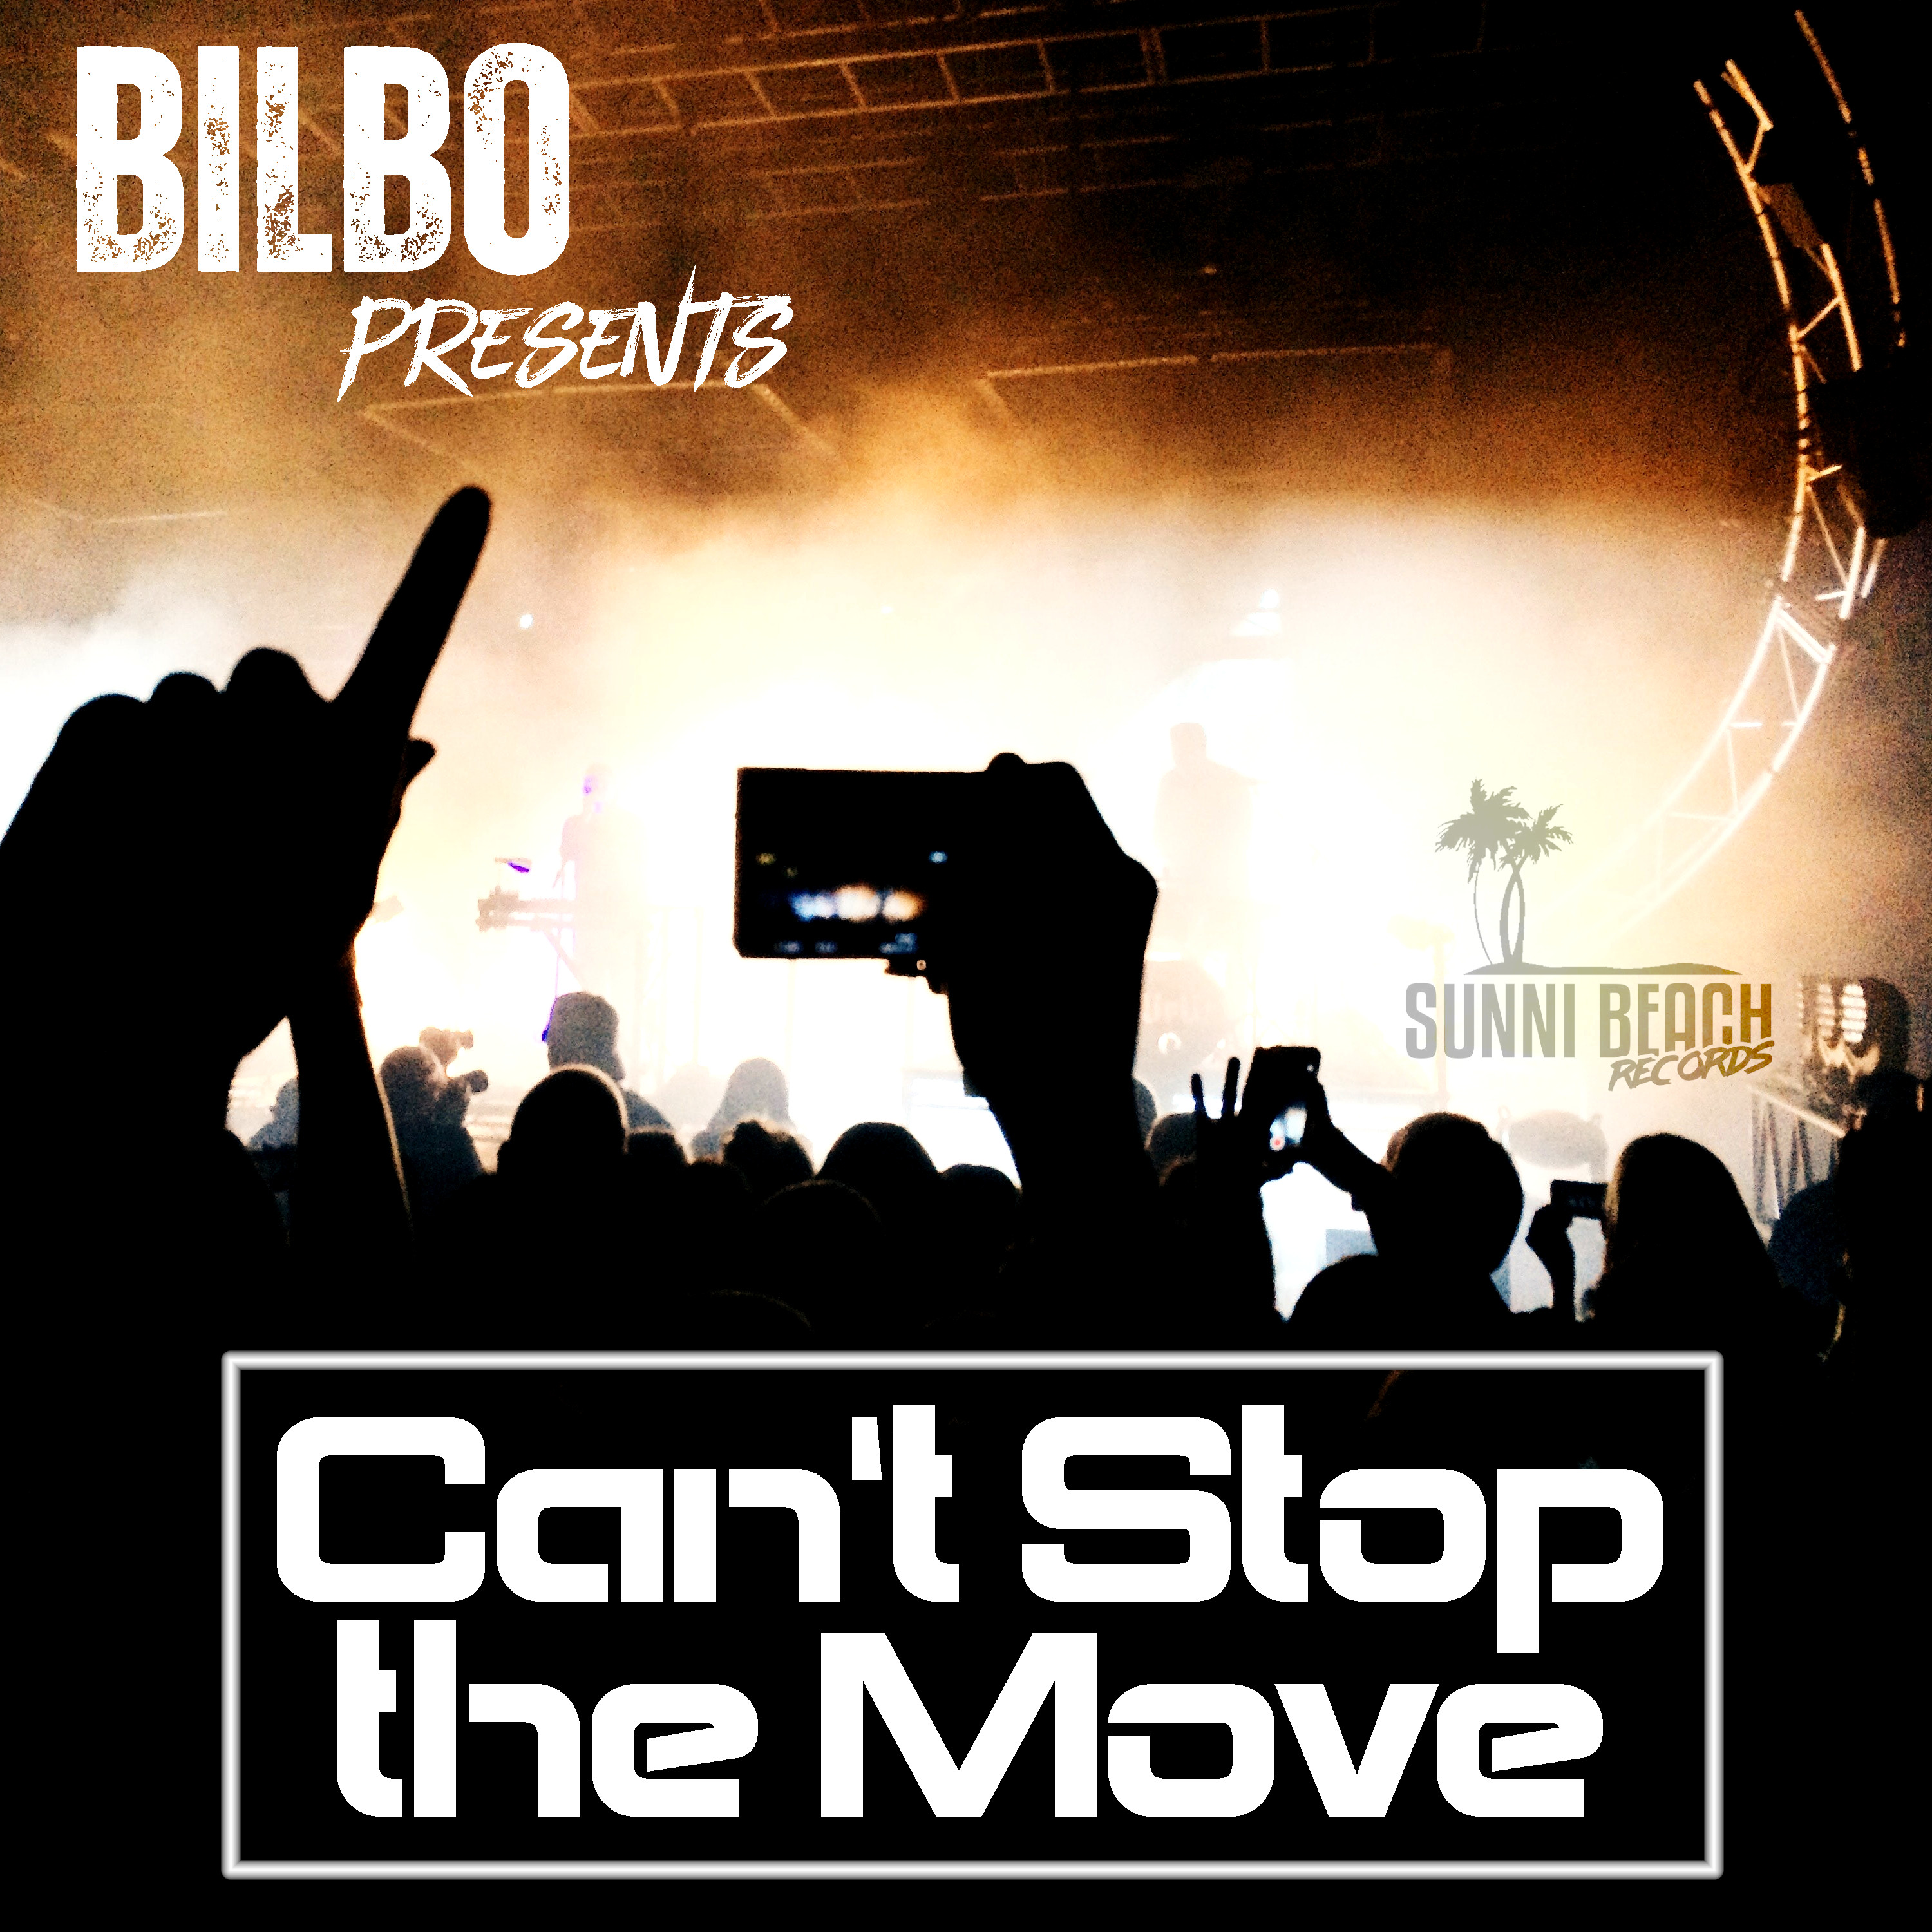 Biblo Can't Stop the Move